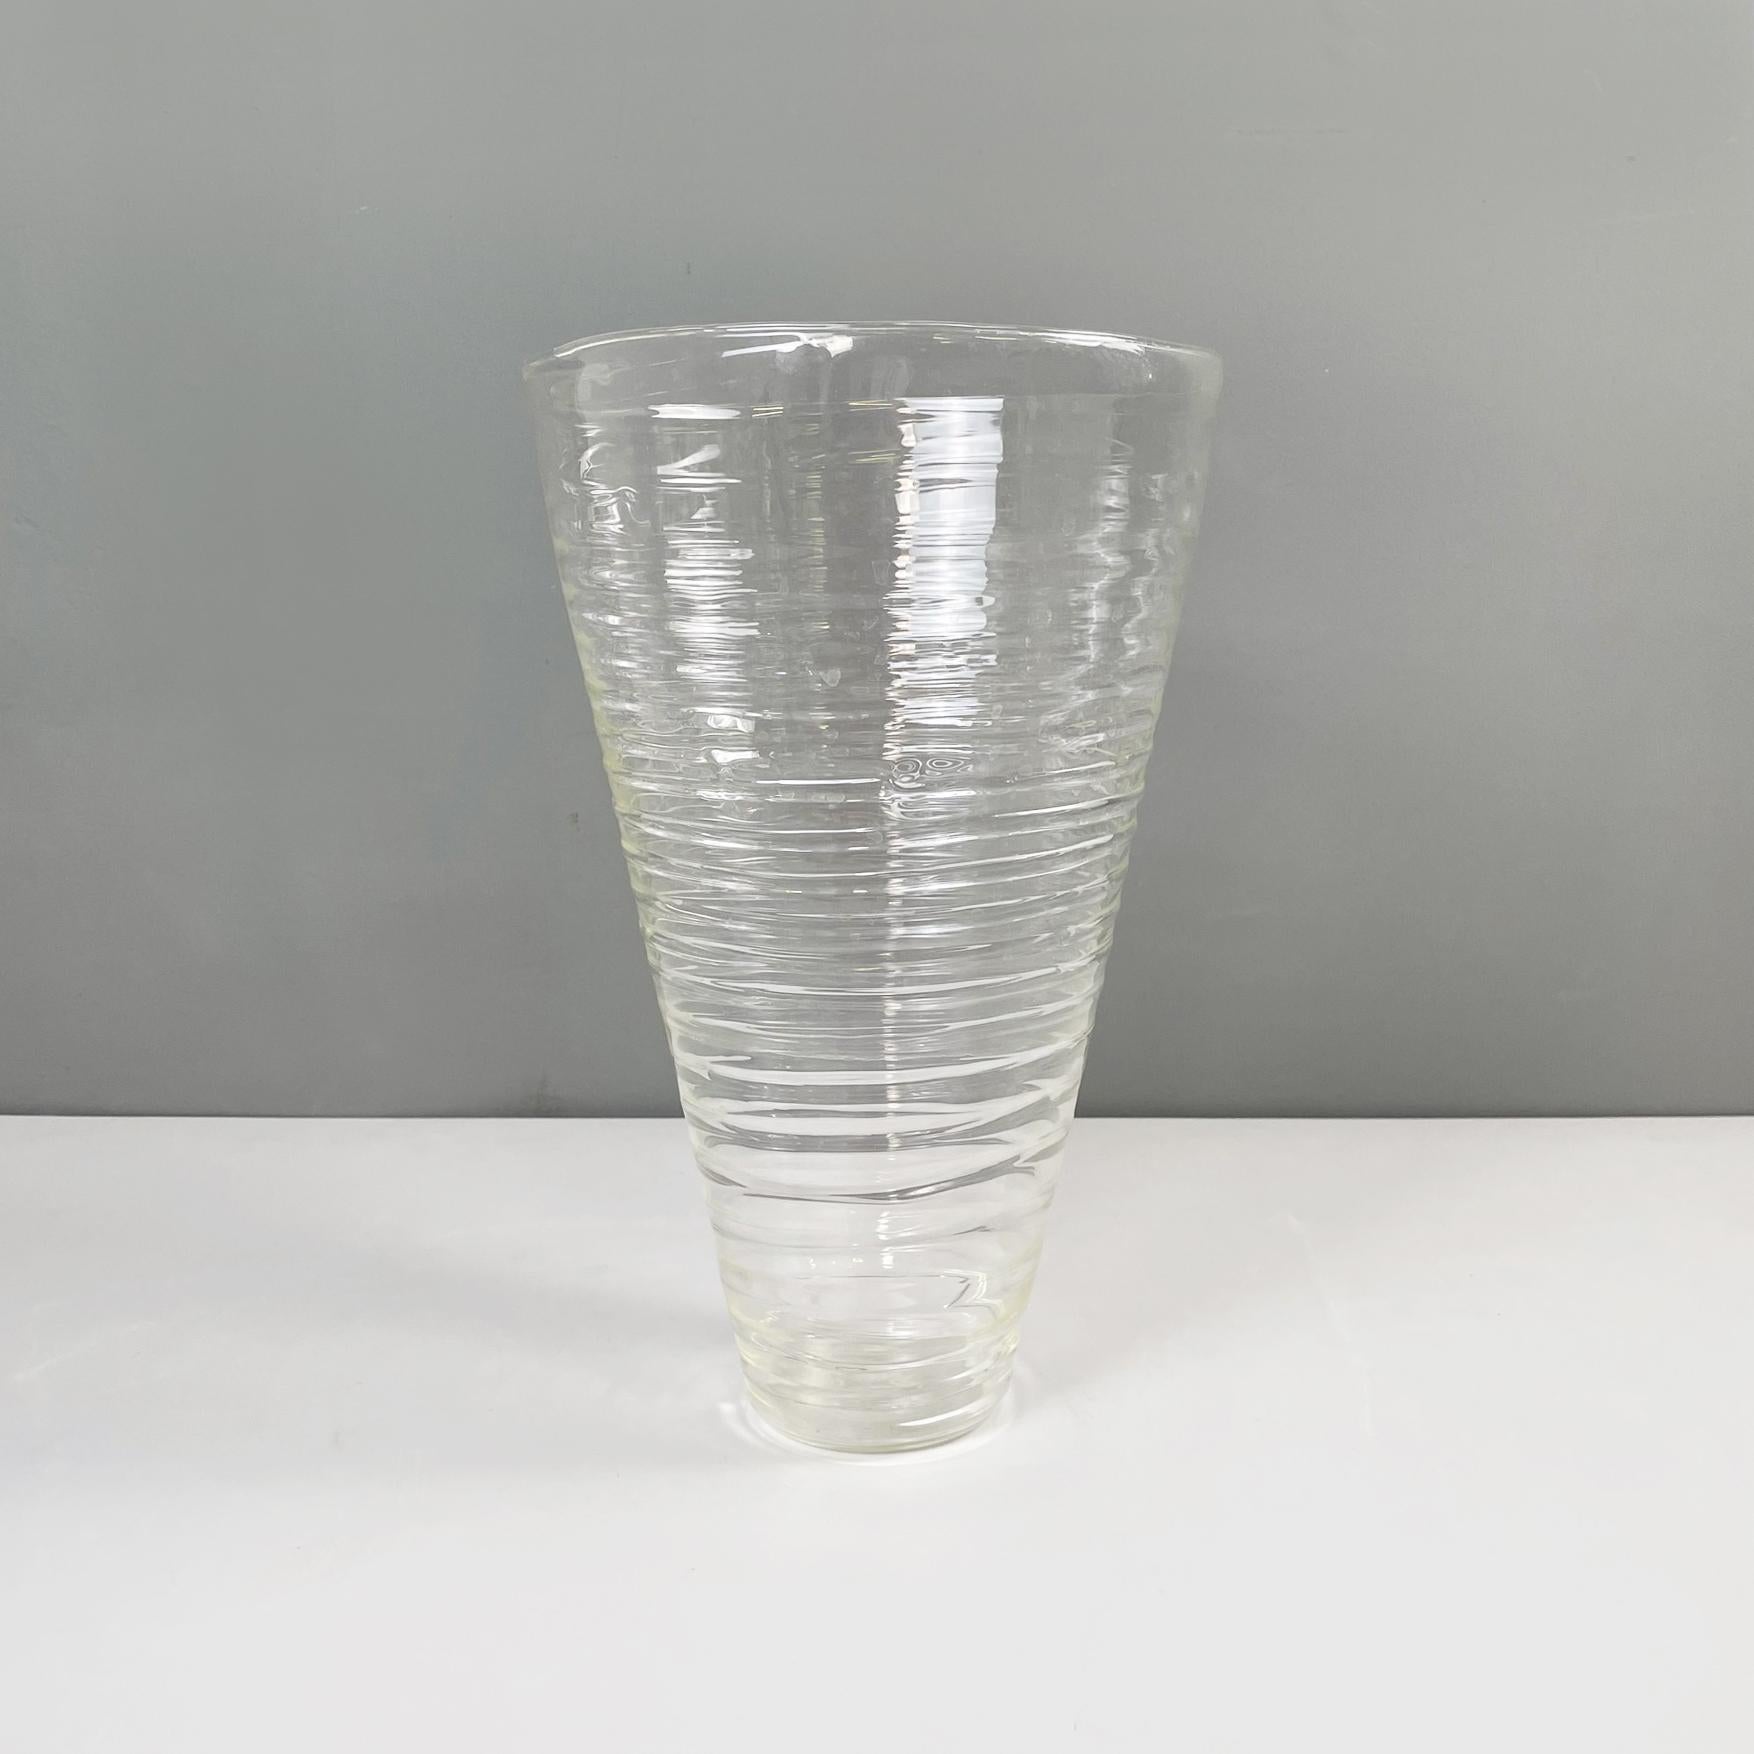 Italian modern Glass vase with round shape and spiral by Roberto Faccioli, 1990s
Round base vase in finely handcrafted glass. The structure tends to narrow towards the base and it has a spiral on the whole surface.
Designed and produced by Roberto